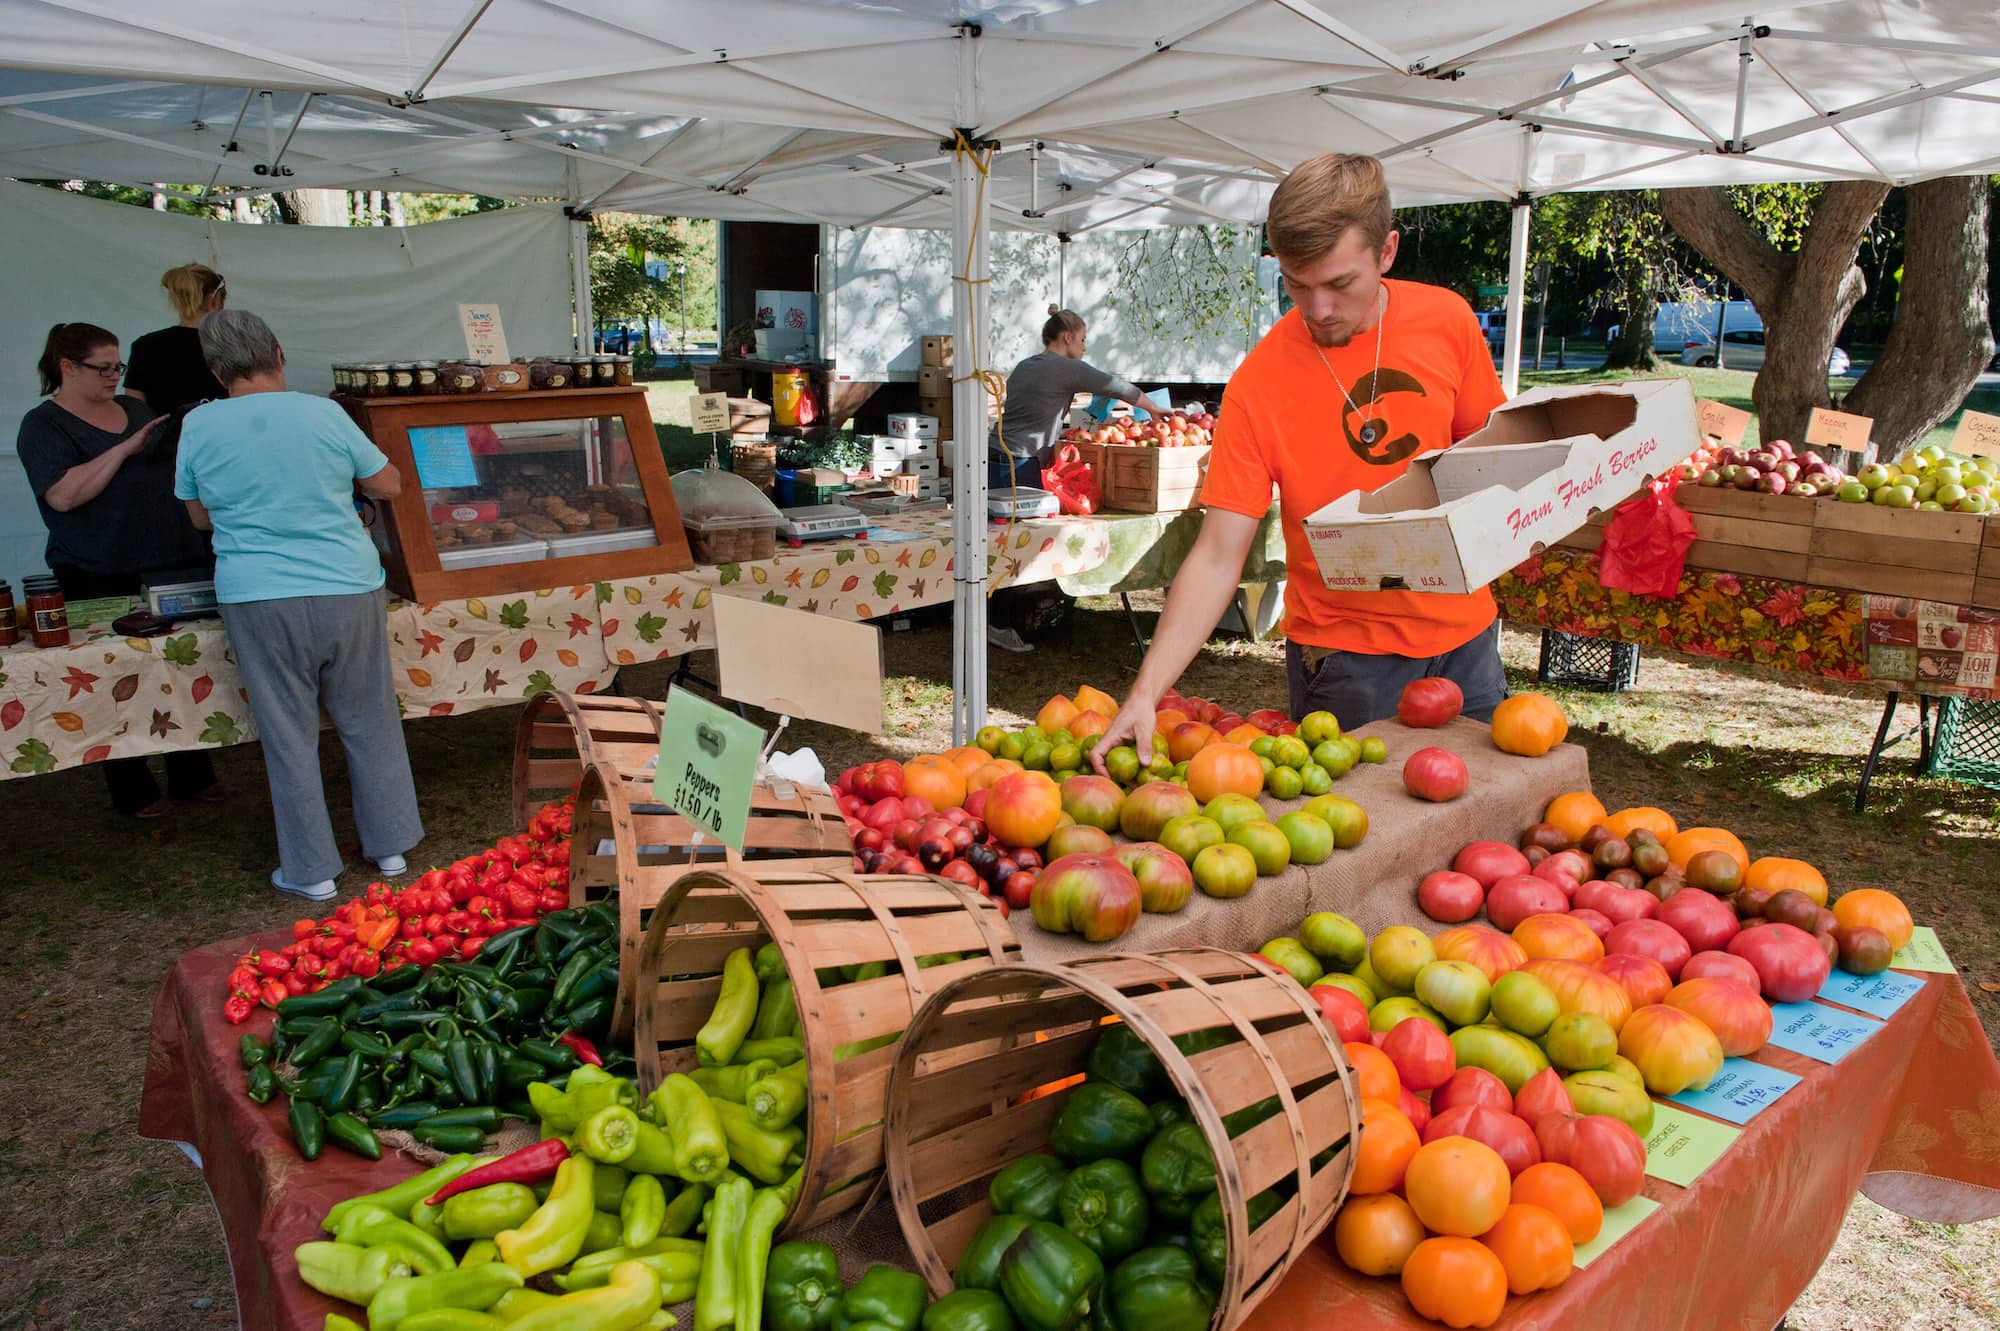 A person places fruit on a large table, under a large, outdoor tent.